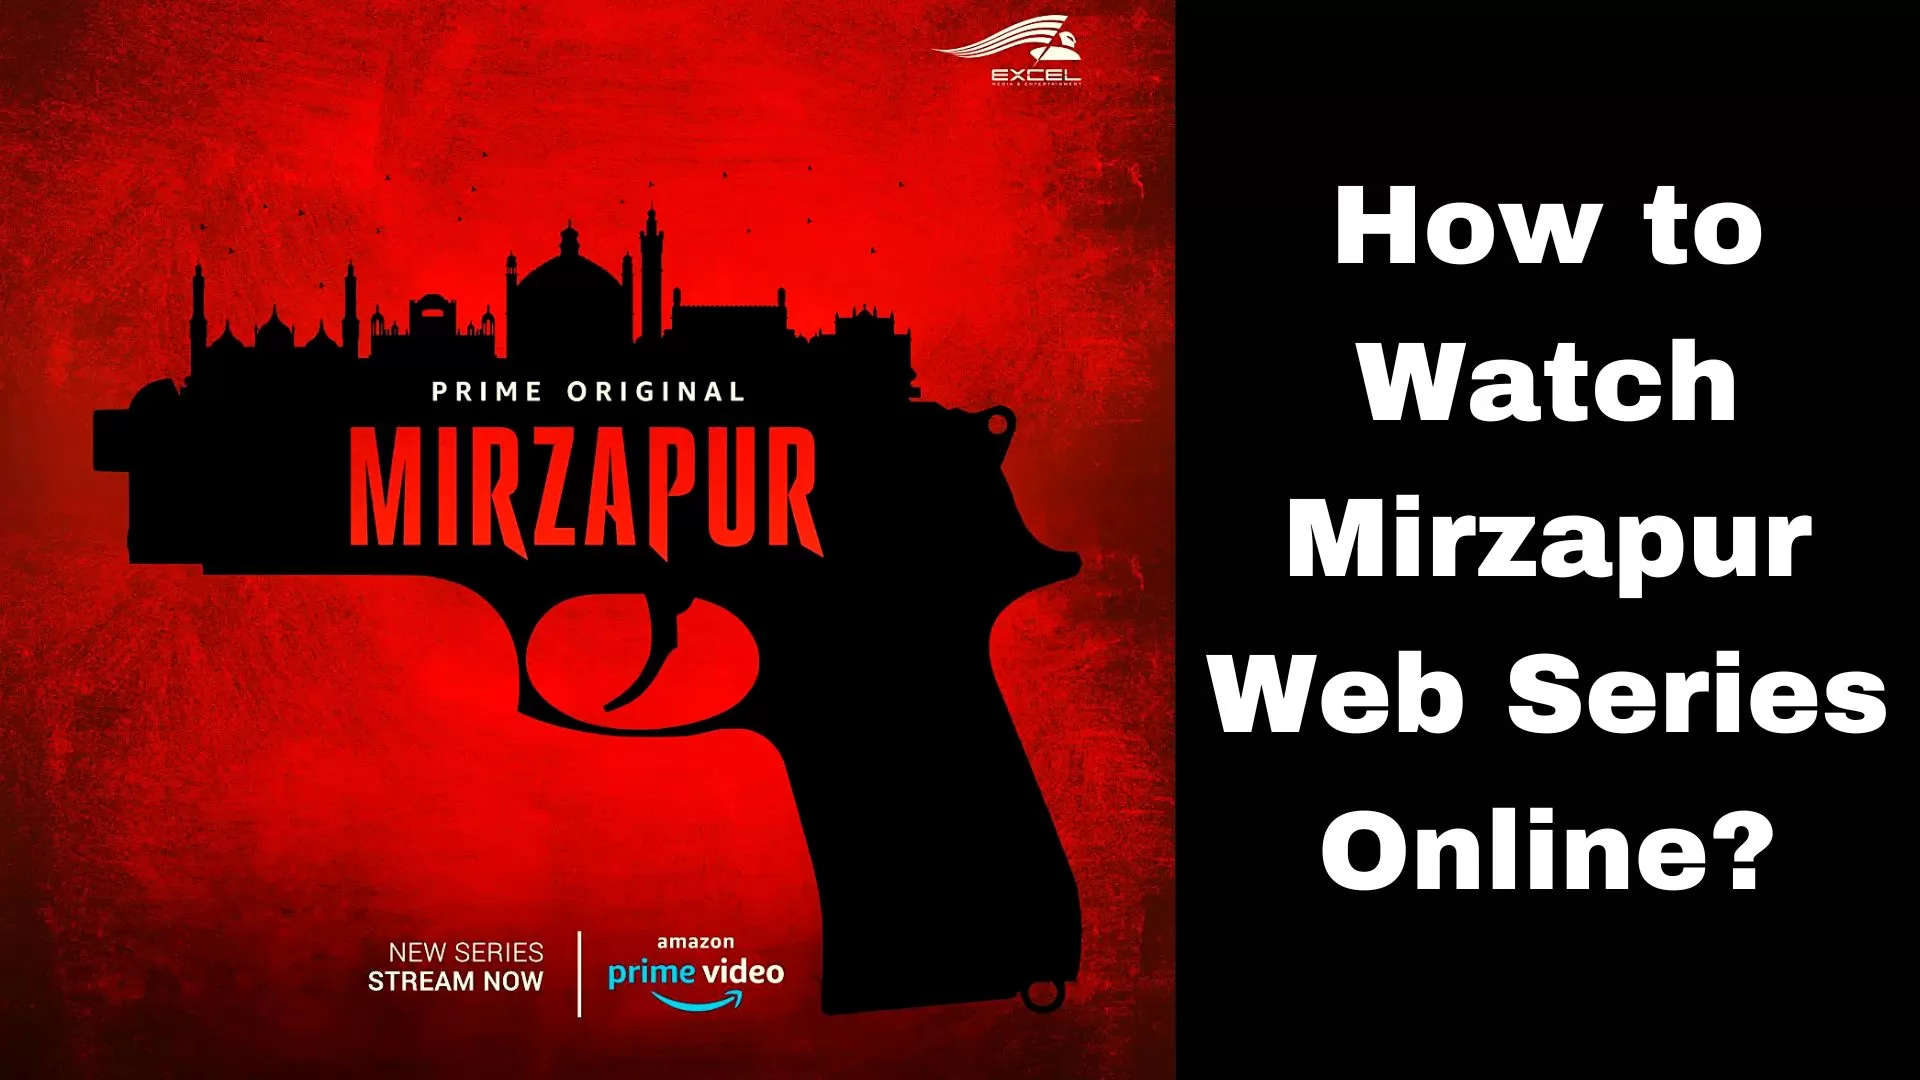 How to Watch Mirzapur Web Series Online?